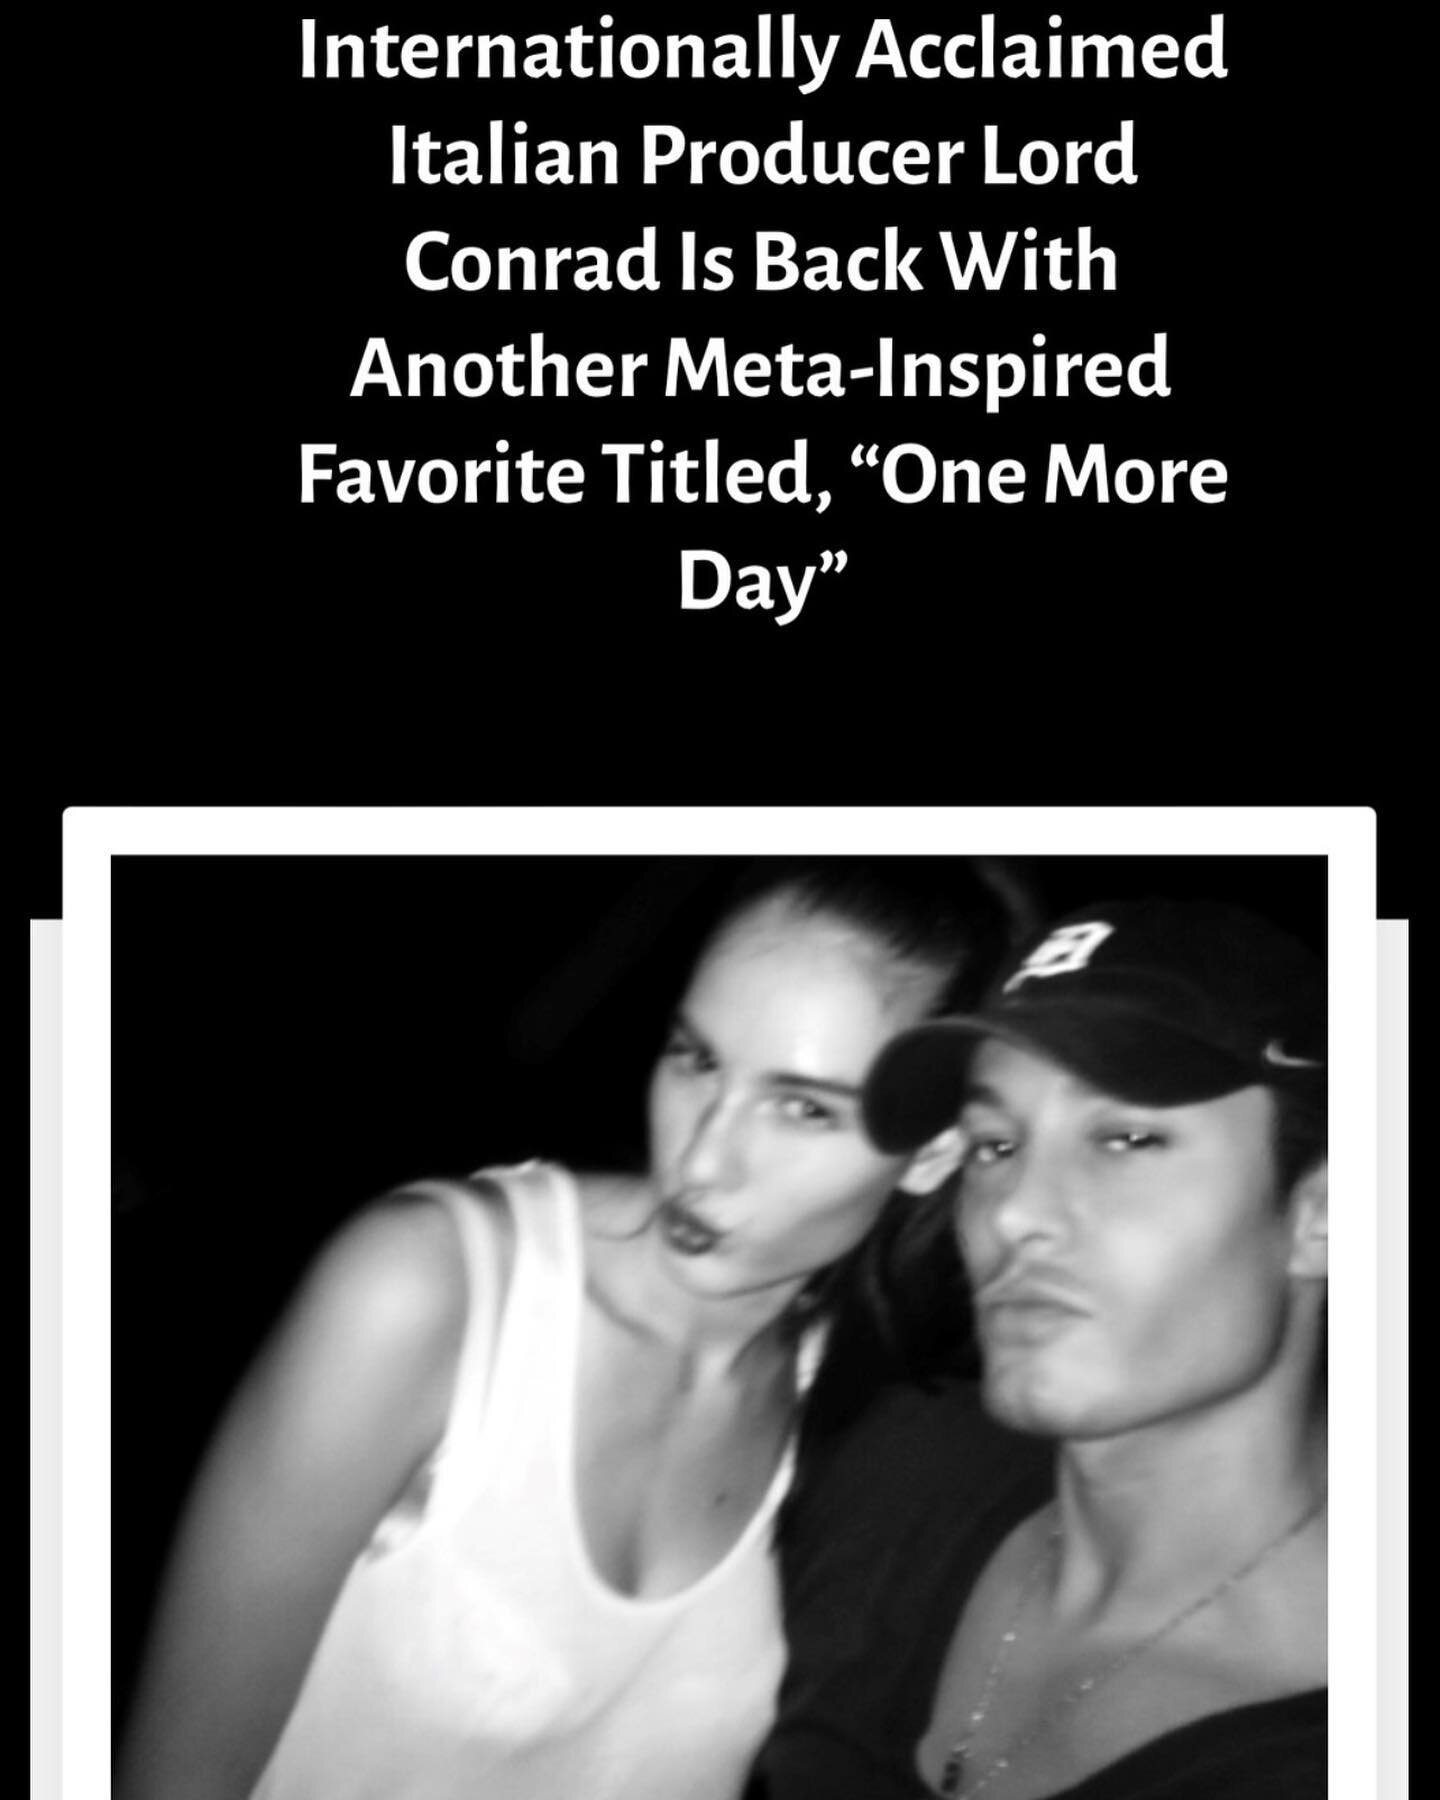 Lord Conrad - One More Day song is a tribute in honor to the Mark Zuckerberg Metaverse and Meta Quest Pro #meta #metaverse #metaquest #metaquestpro #metaverso #vr #musicproducers